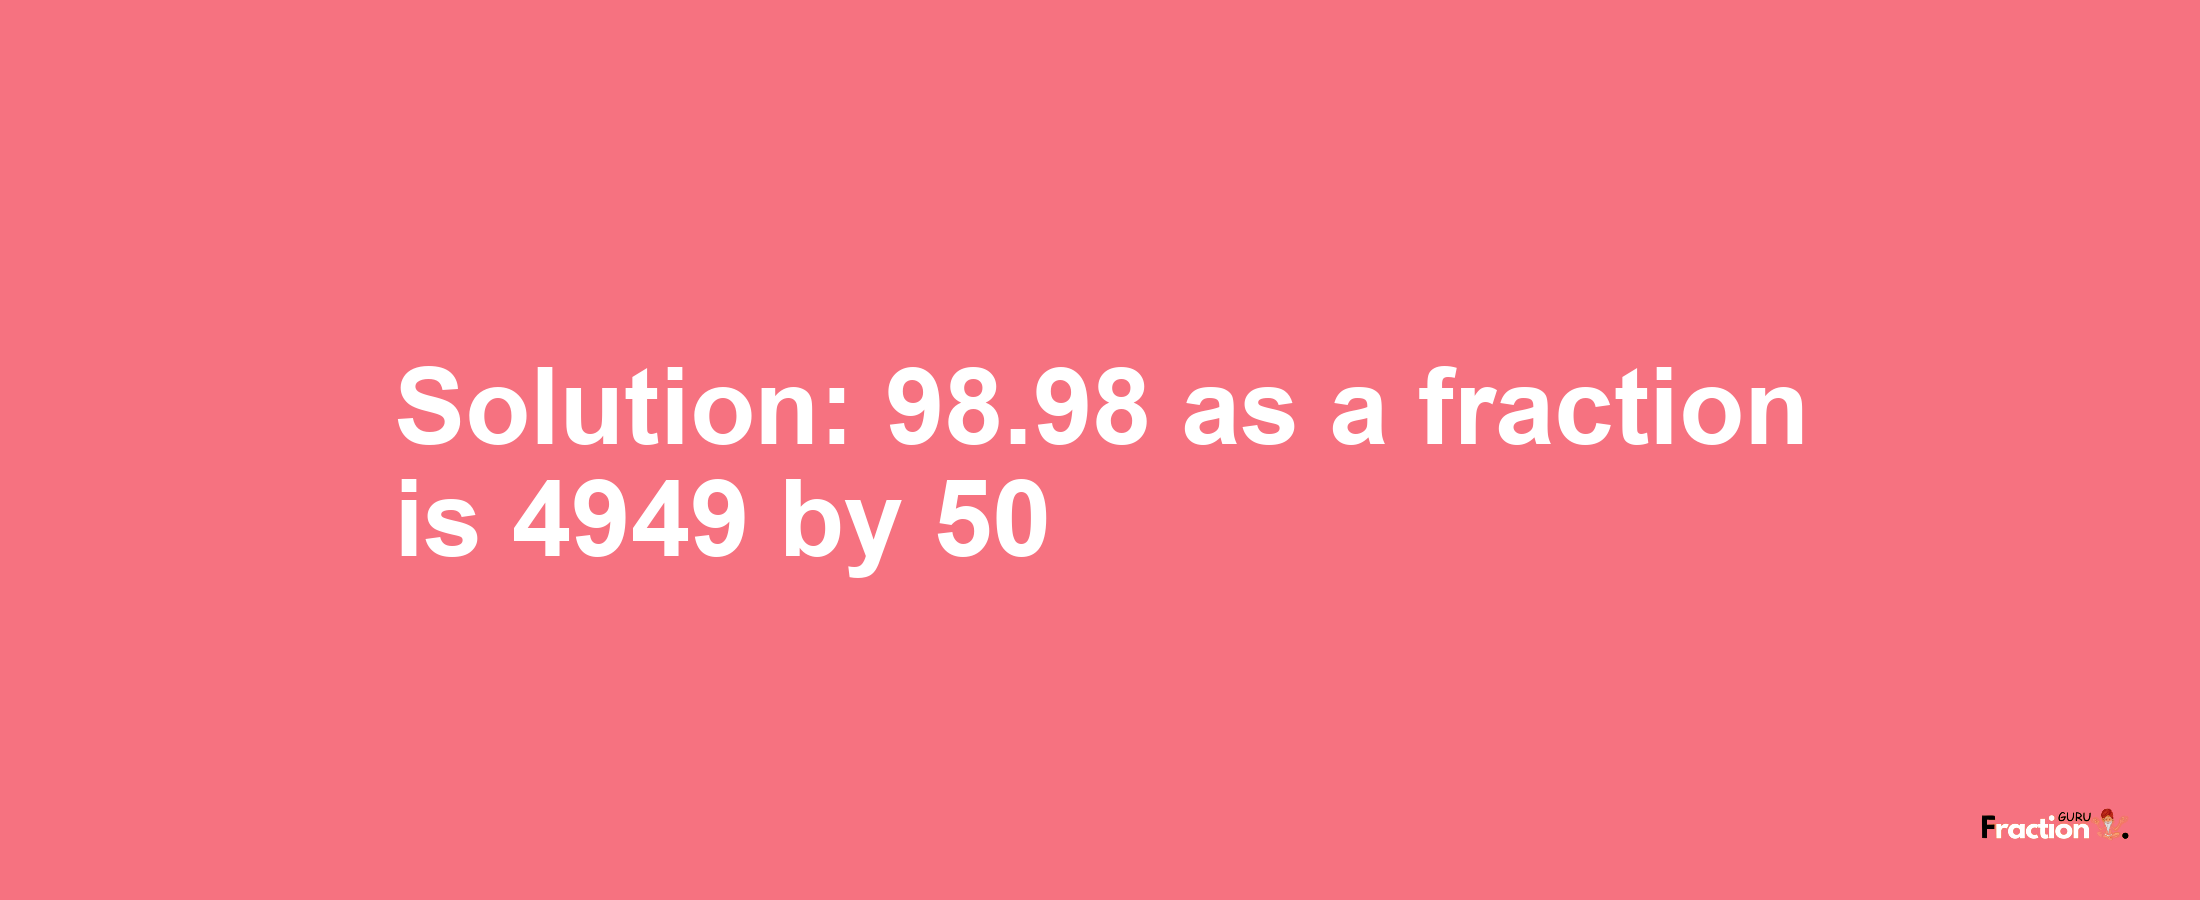 Solution:98.98 as a fraction is 4949/50